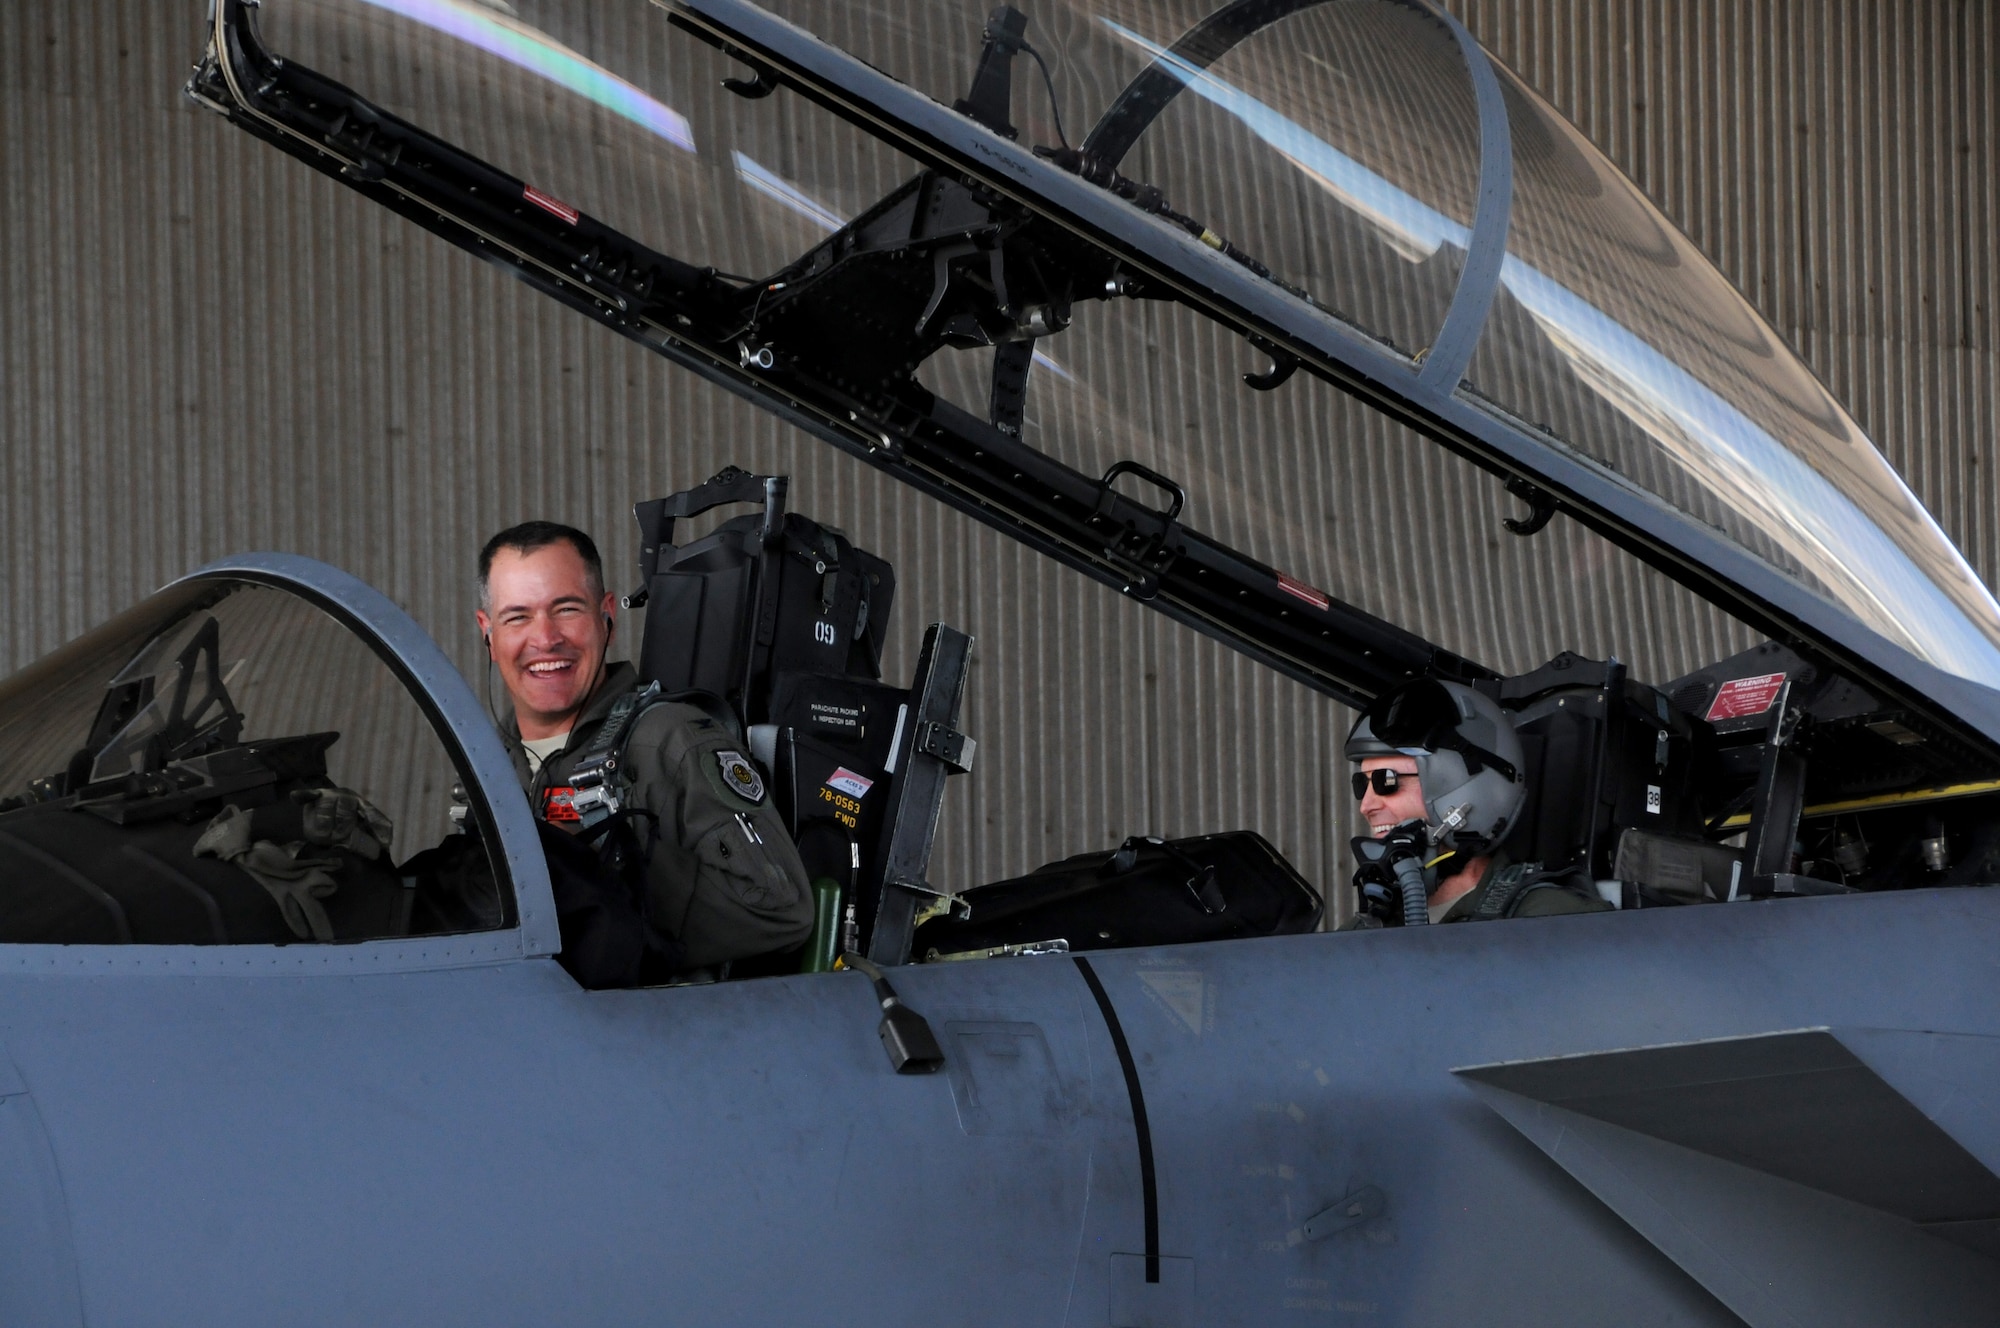 Col. Jeffrey Smith, 173rd Fighter Wing commander and U.S. Air Force Lt. Gen. Darryl Roberson, commander of Air Education and Training Command, ready for take off in an F-15 Eagle at Kingsley Field, Ore., July 6, 2016. Roberson had a firsthand look at the unit's mission and capabilities, which includes training F-15C Eagle fighter pilots. (U.S. Air National Guard photo by Staff Sgt. Penny Snoozy)